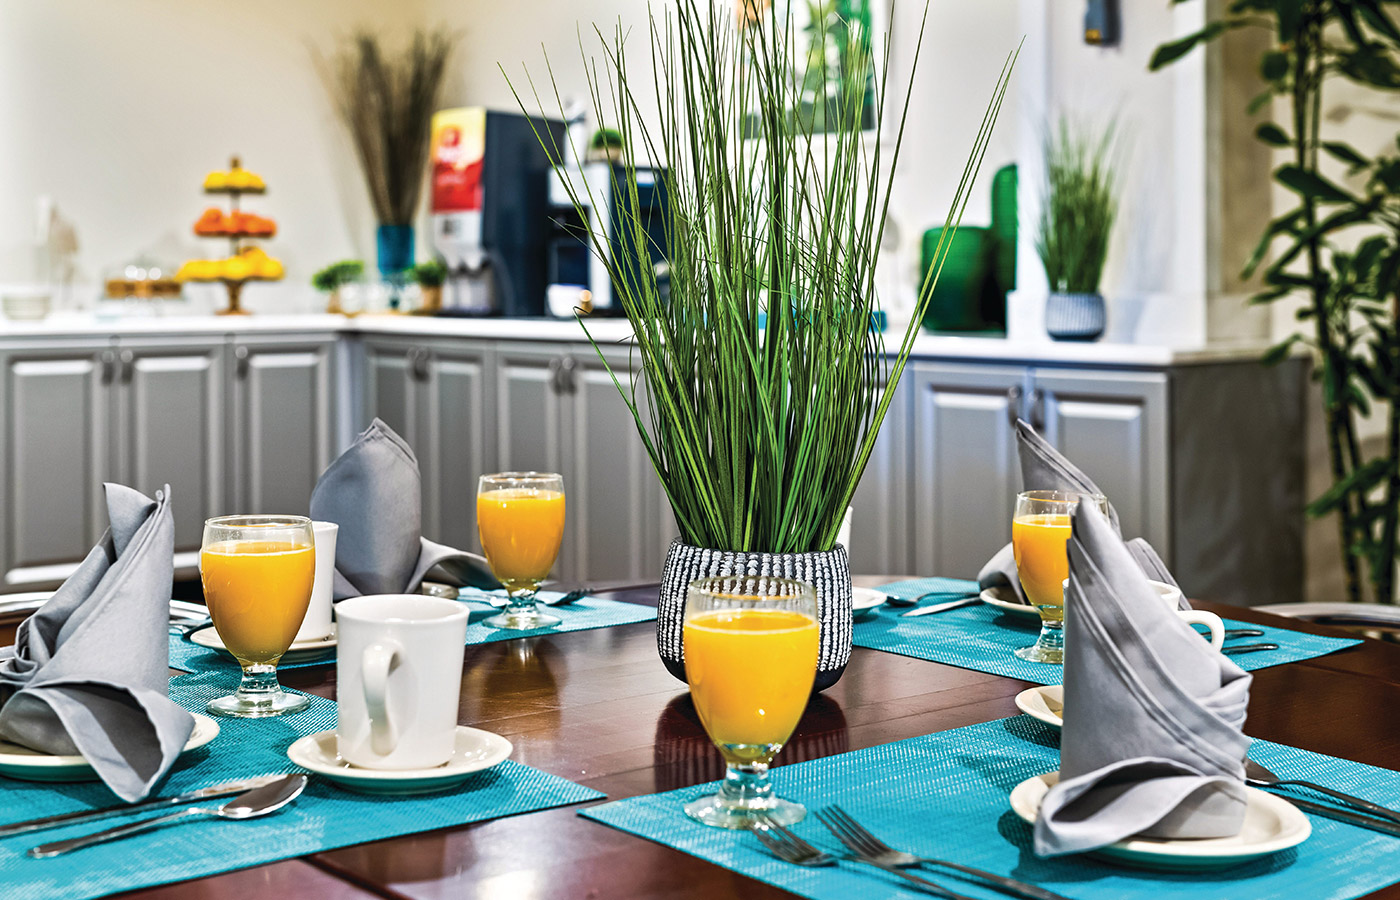 Dining table arranged for breakfast with orange juice in champagne glasses